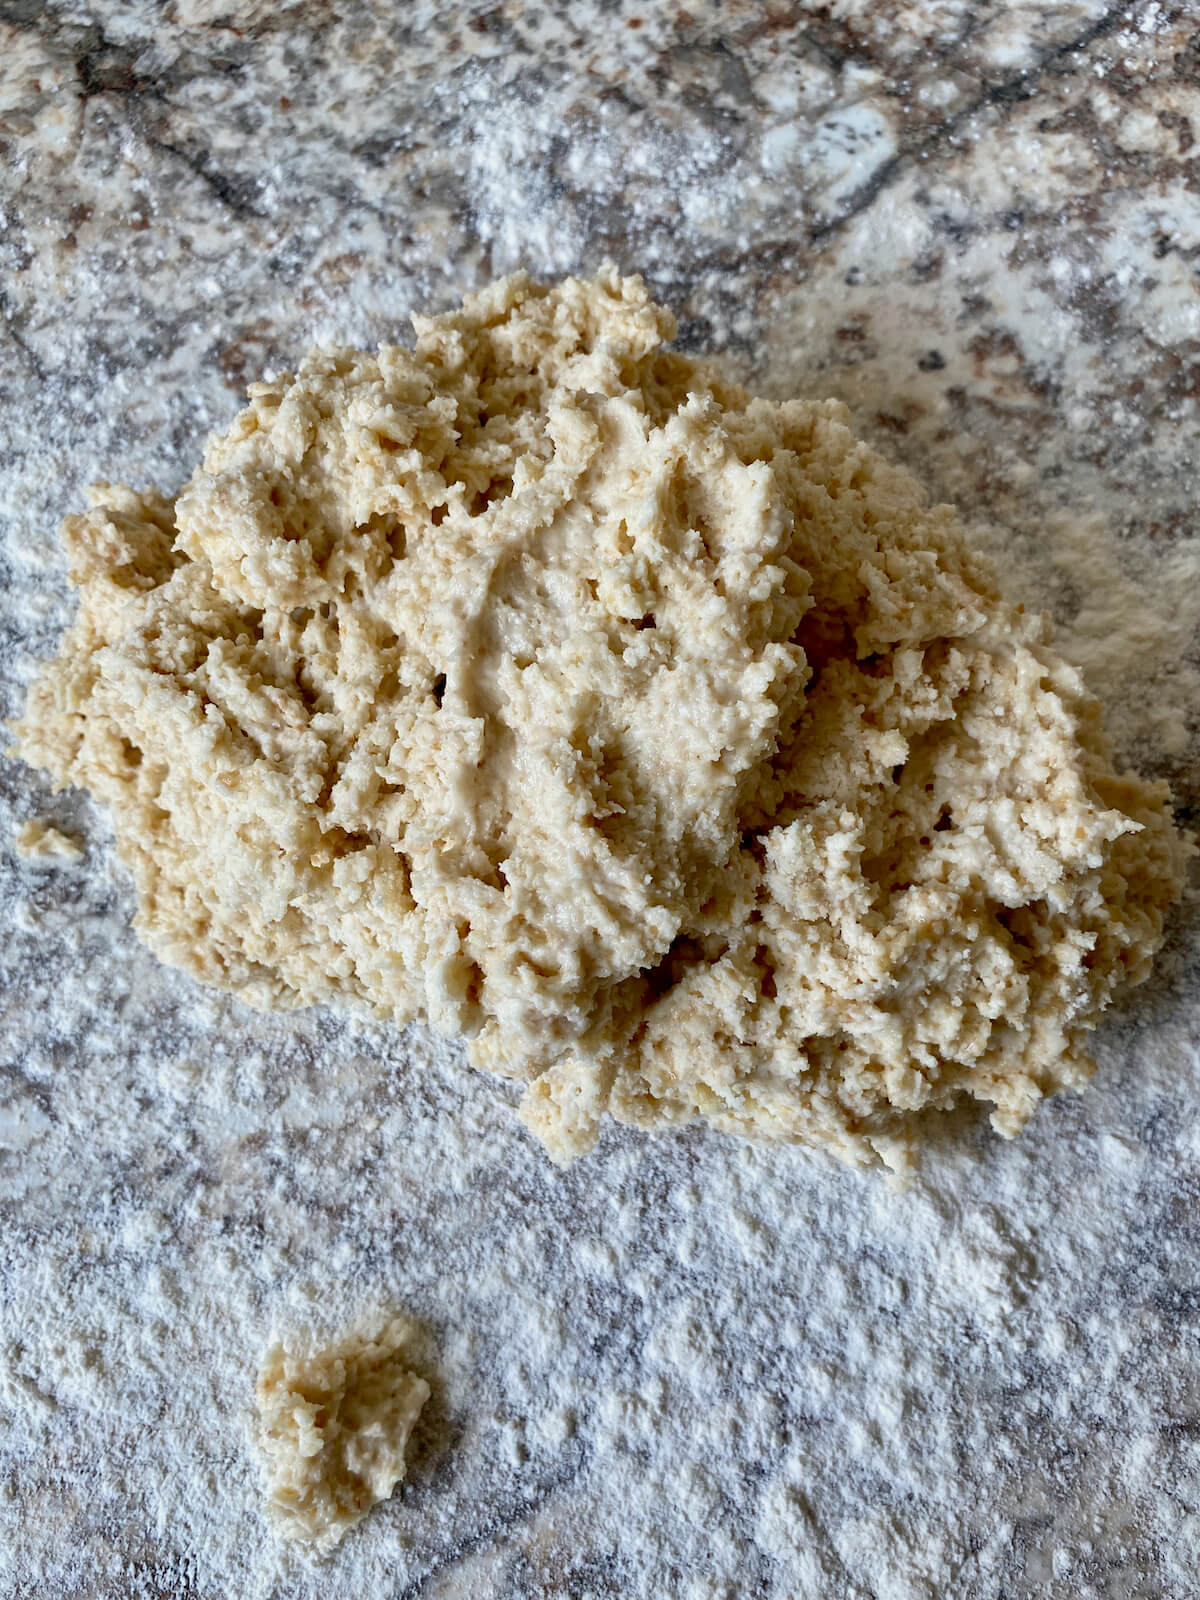 Rough, shaggy biscuit dough on a floured countertop.